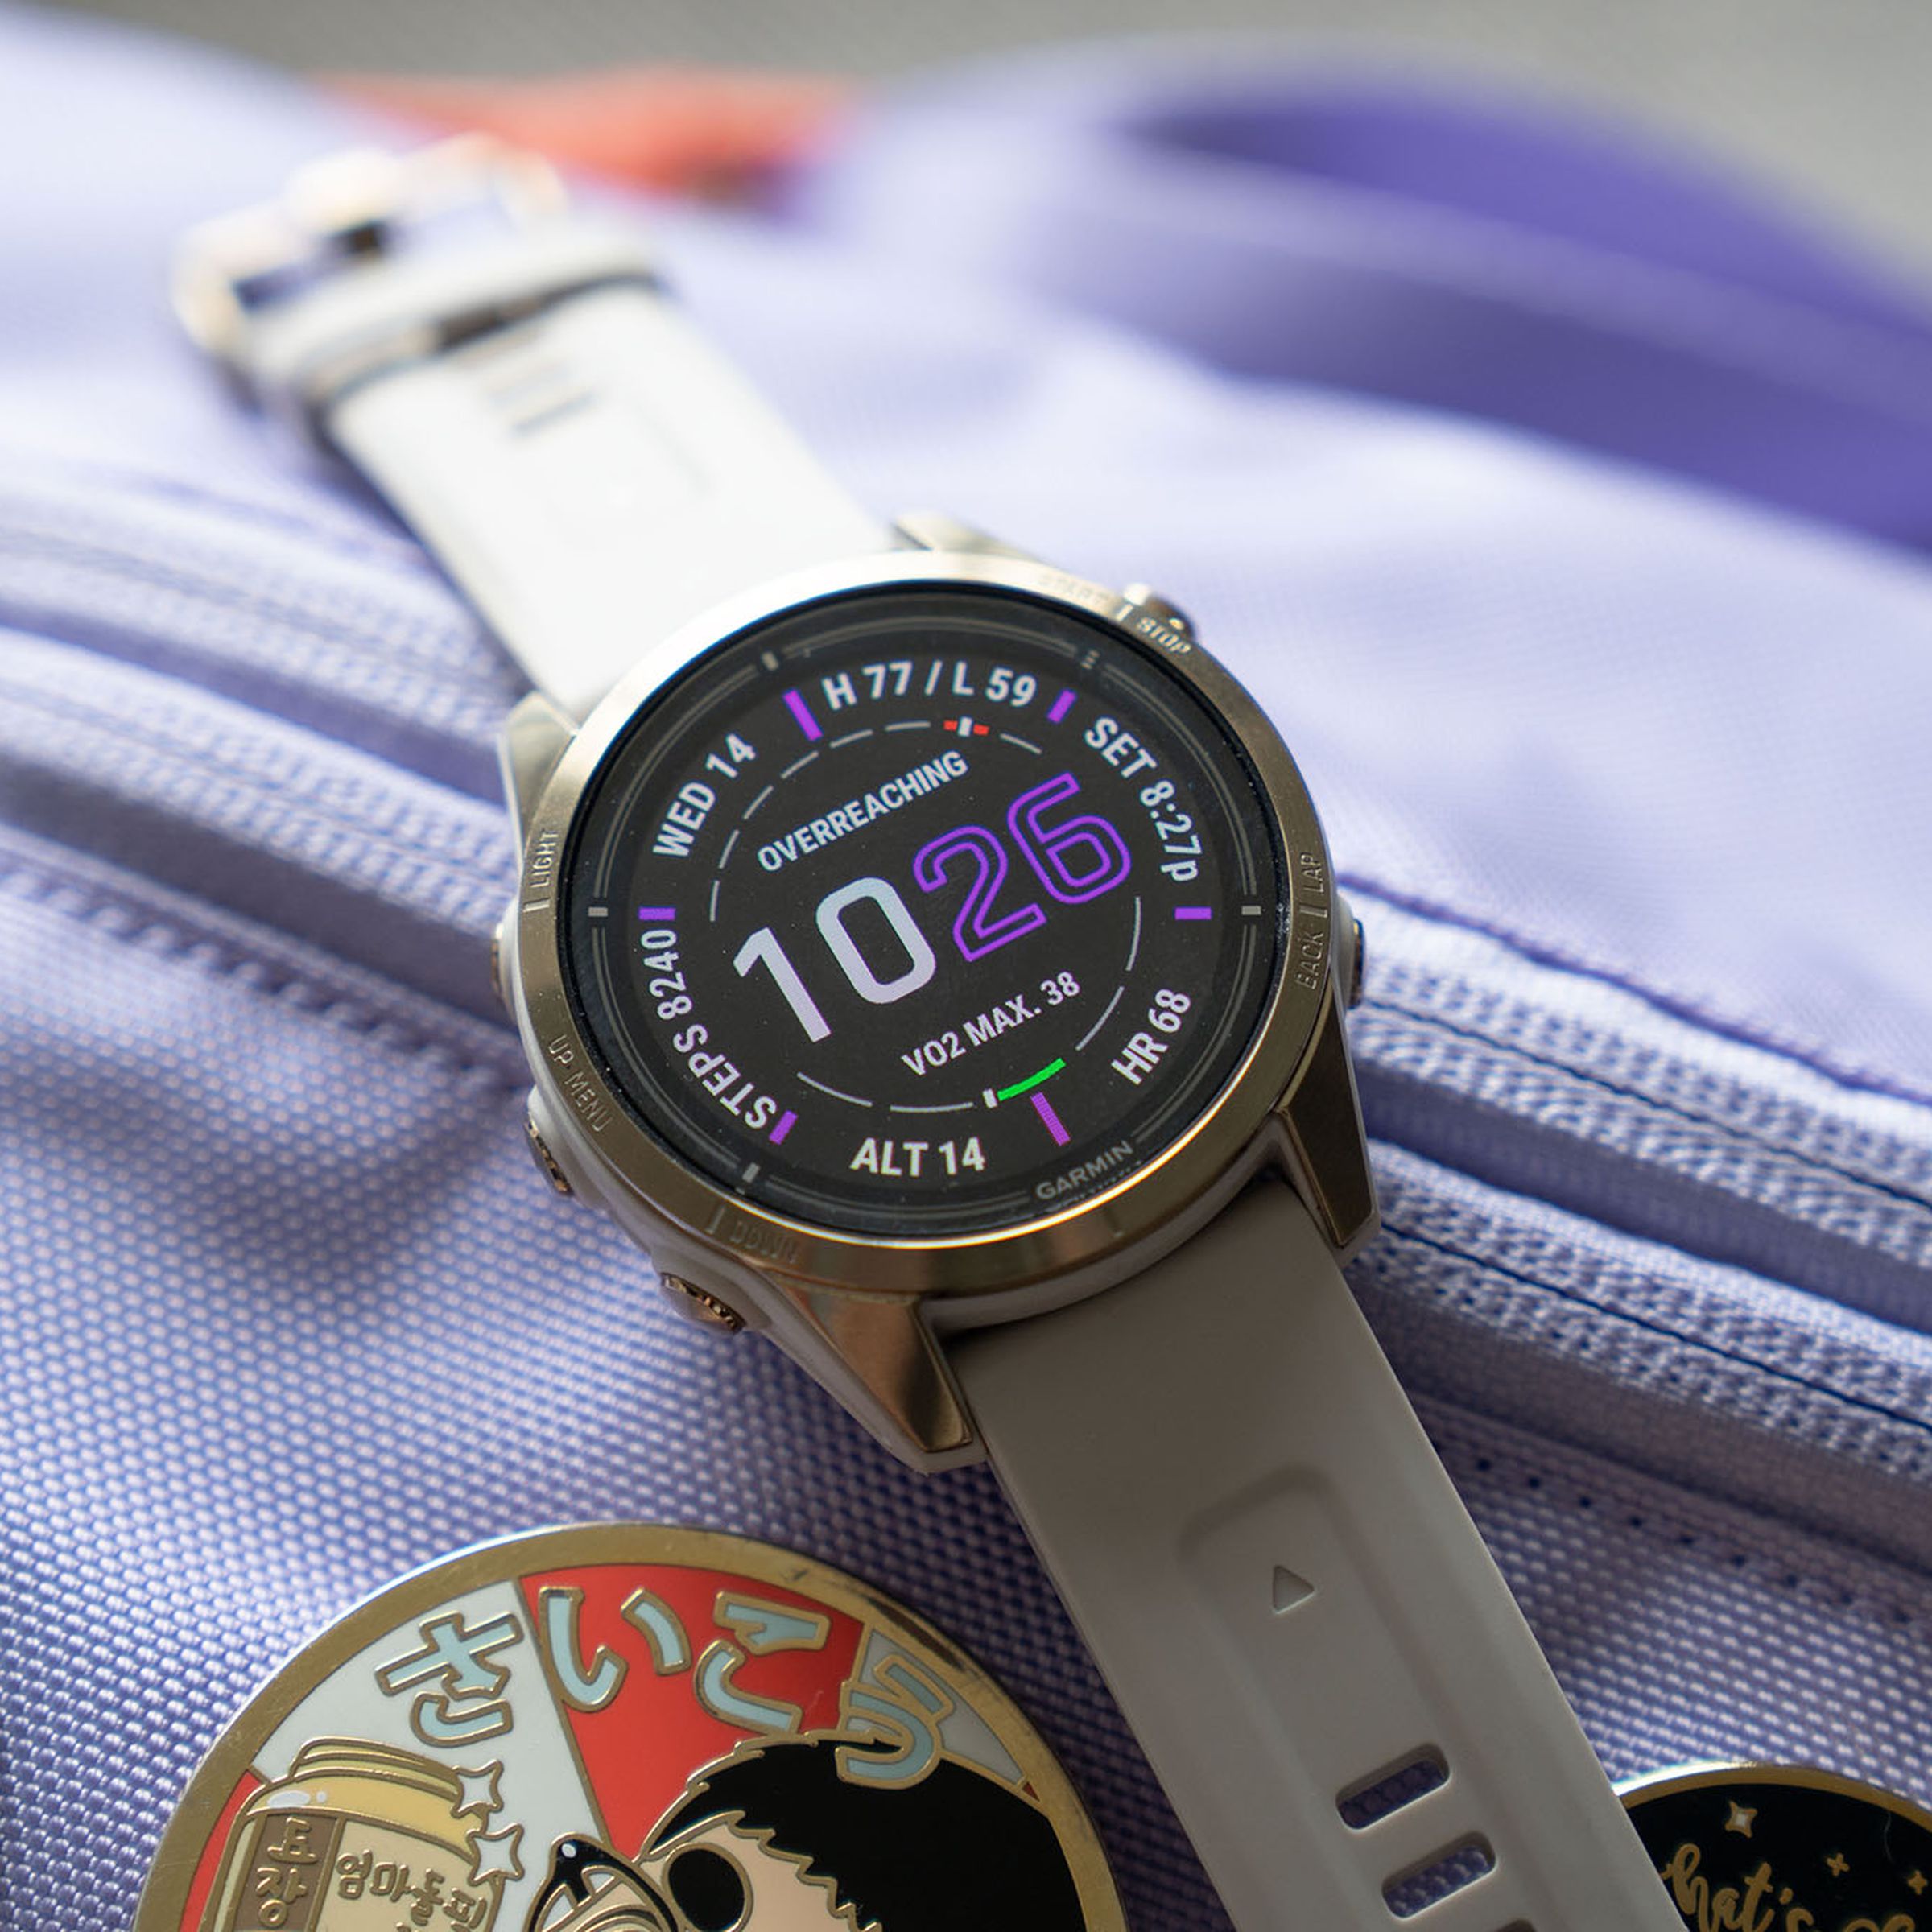 The 42mm Garmin Epix 2 Pro on top of a lavender bag with enamel pins.